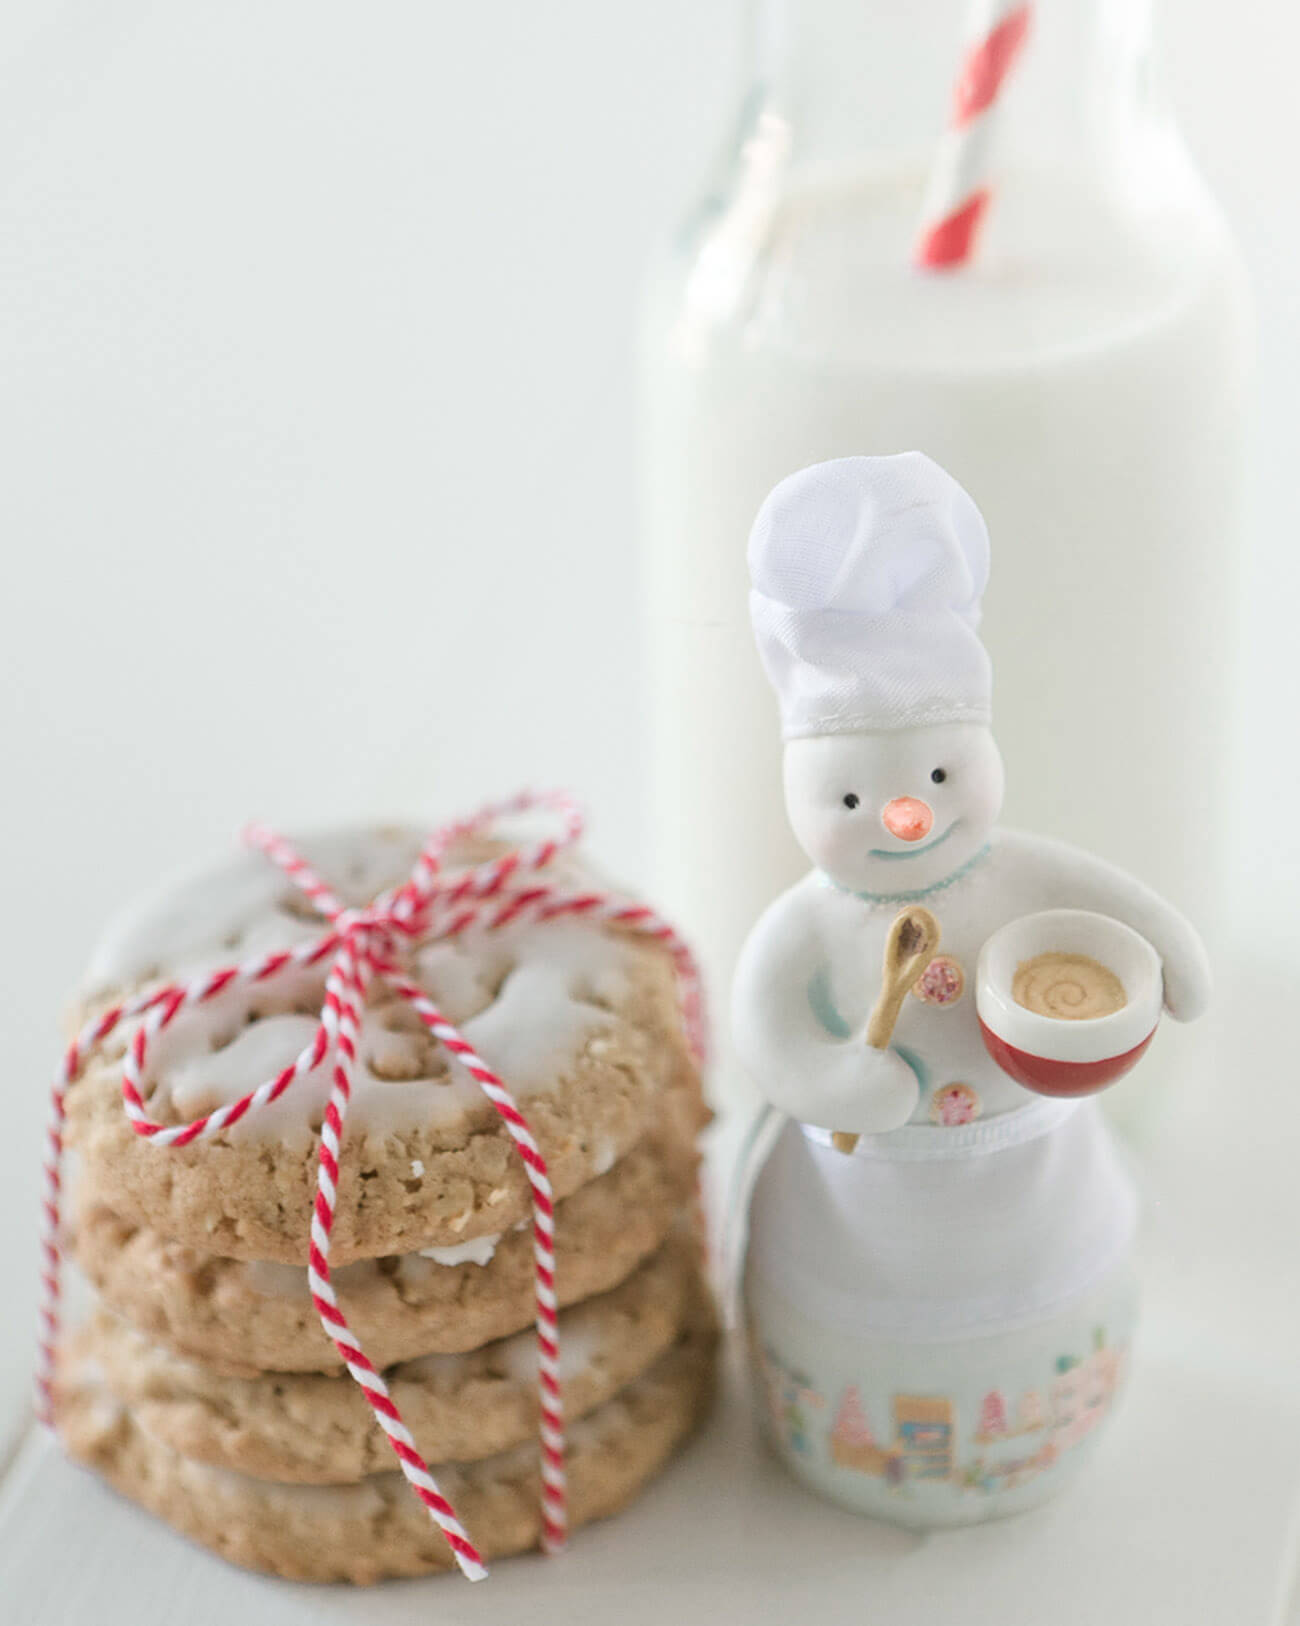 Photo of oatmeal cookies tied together with red and white twine, a china snowman, and a bottle of milk